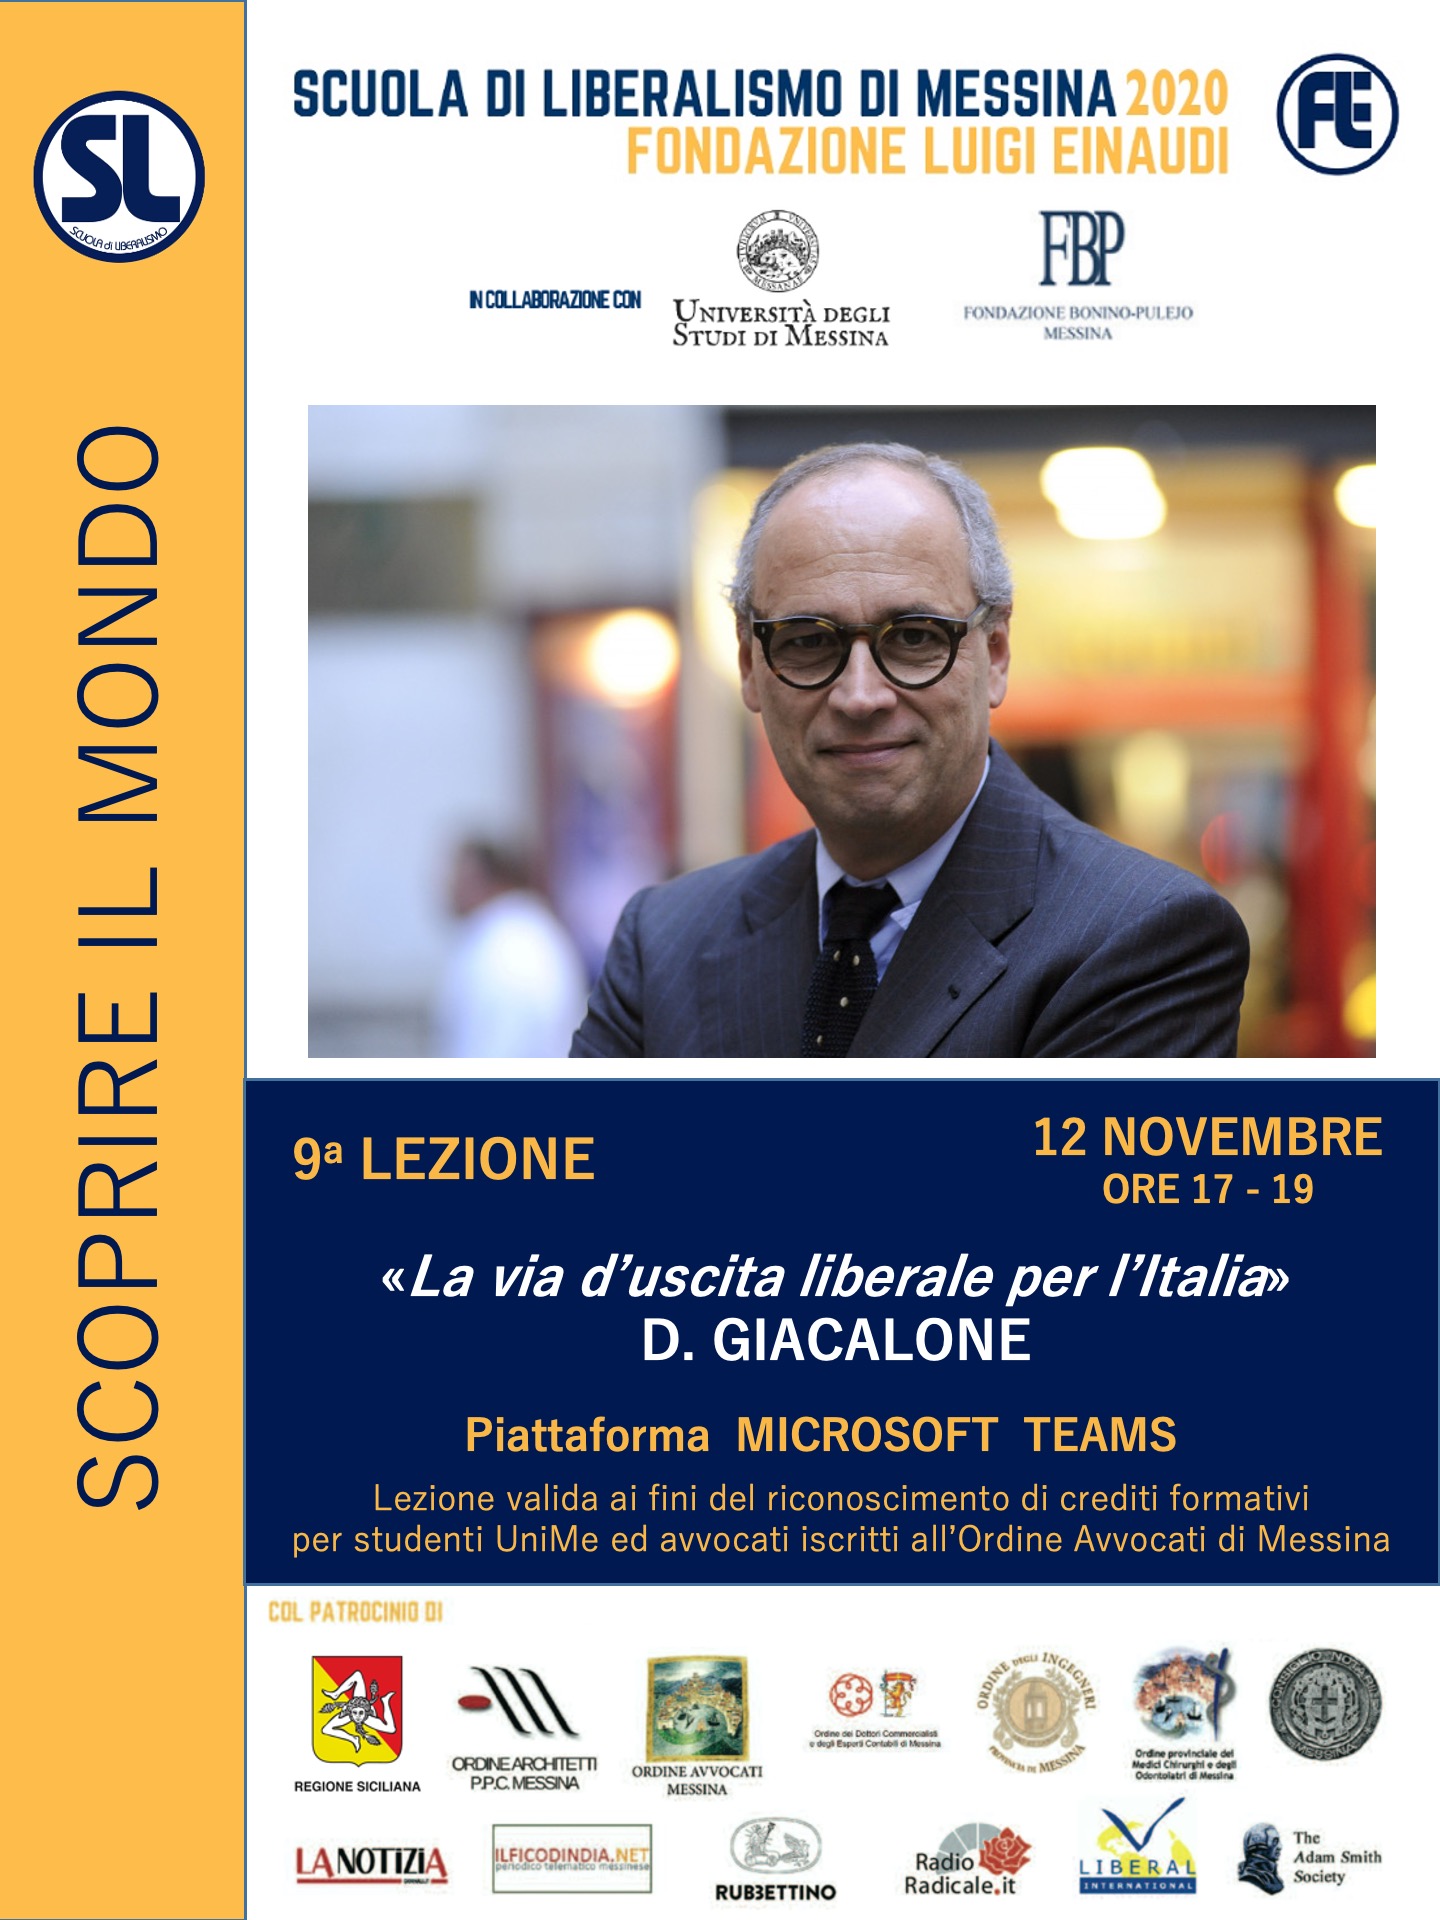 Messina, November 12, 2020. School of Liberalism: Davide Giacalone gives the lecture